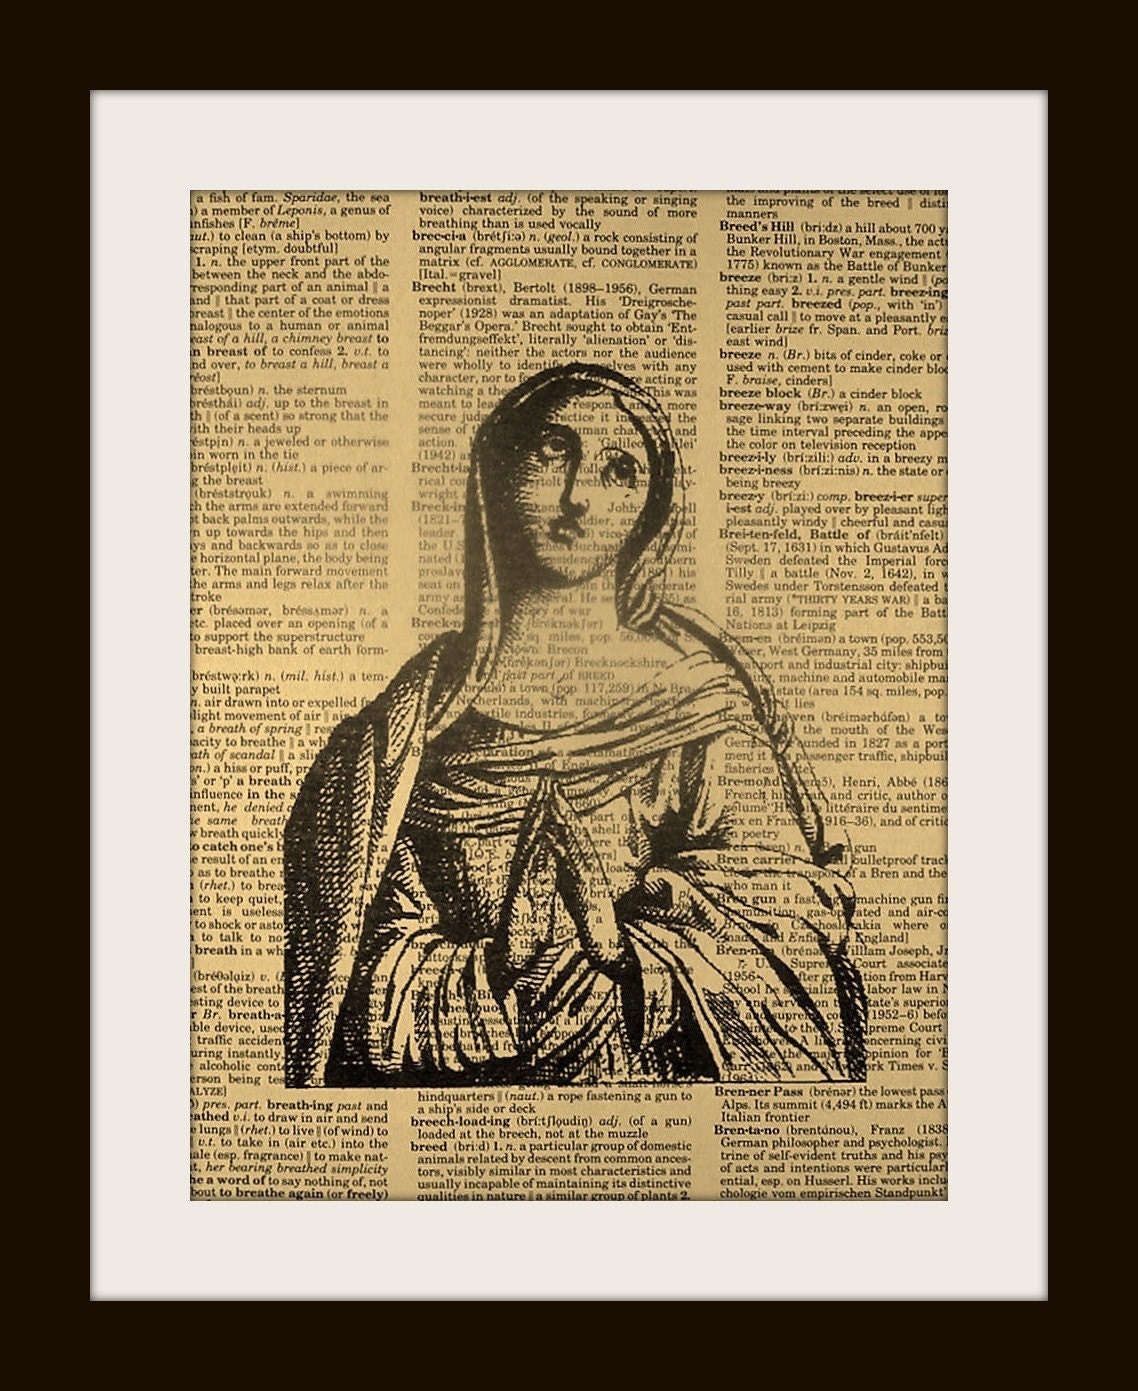 MARY OUR LADY Print on Vintage Dictionary Page FREE SHIPPING WORLDWIDE